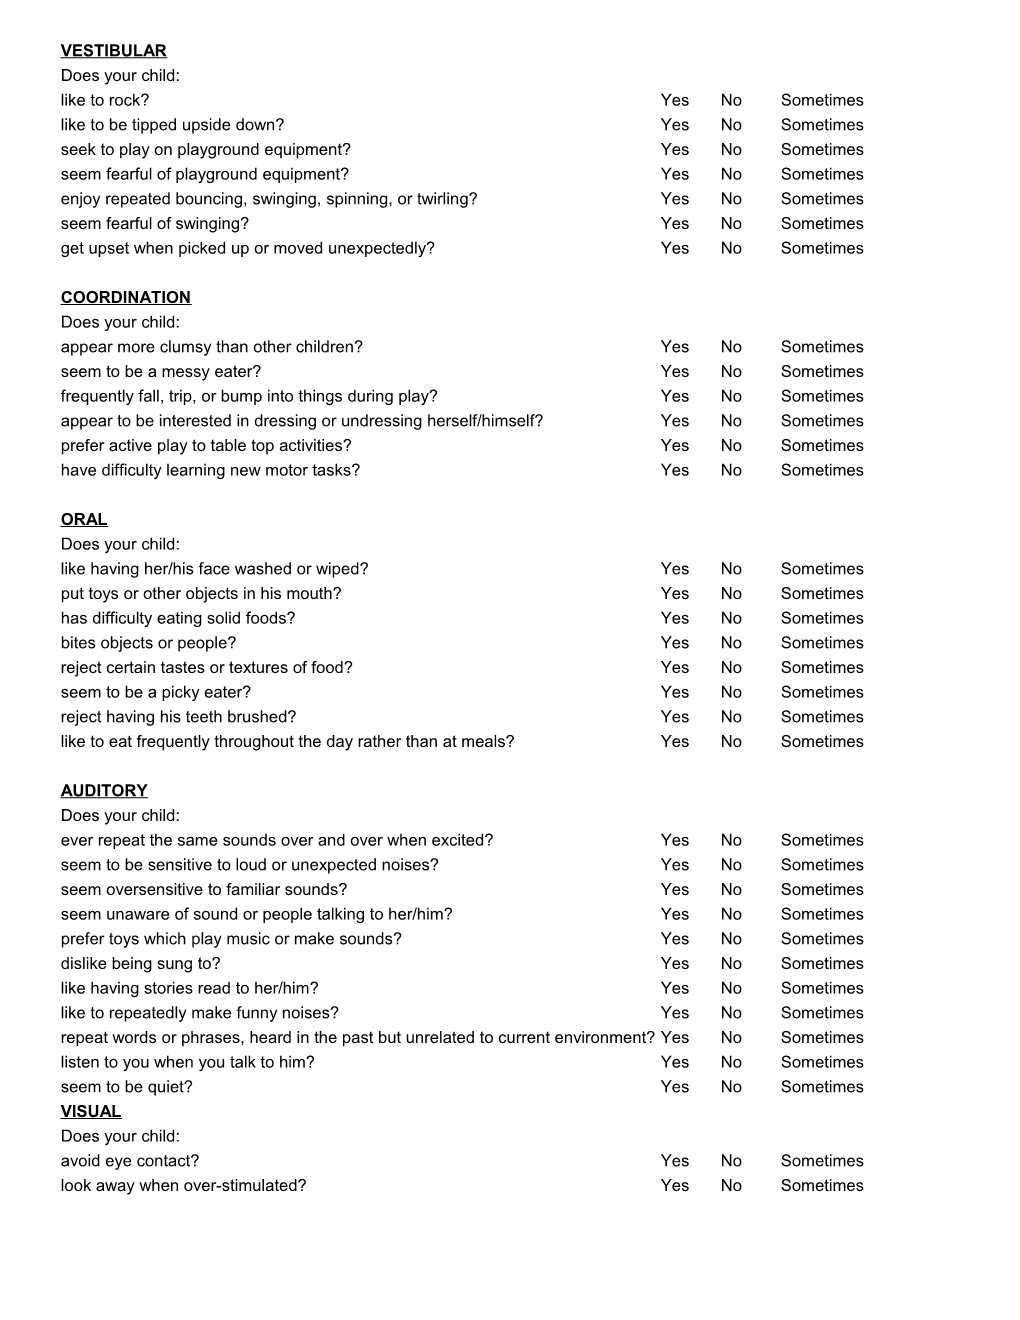 Answer Each Question, Indicating Which of These Behaviors Your Child Exhibits